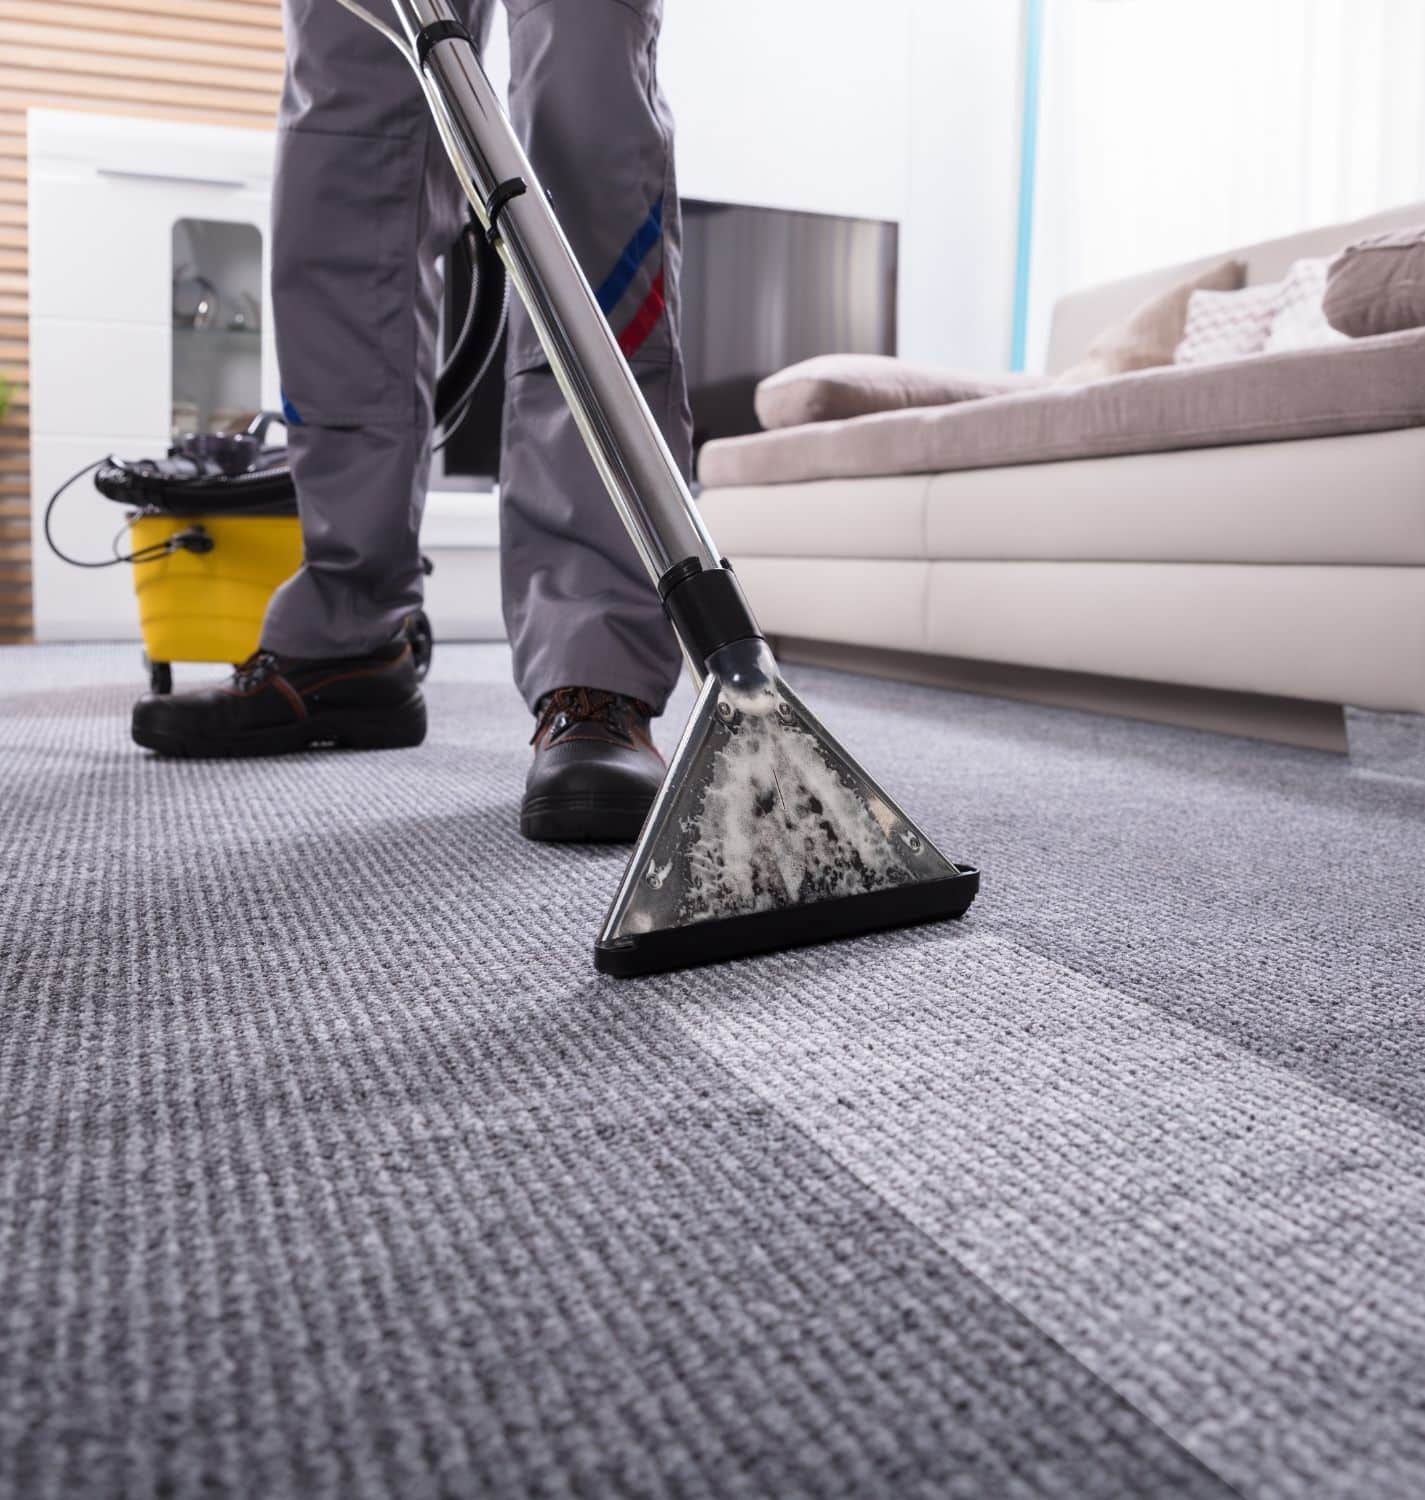 Carpet Cleaning Residential Carpet Cleaning Section 2